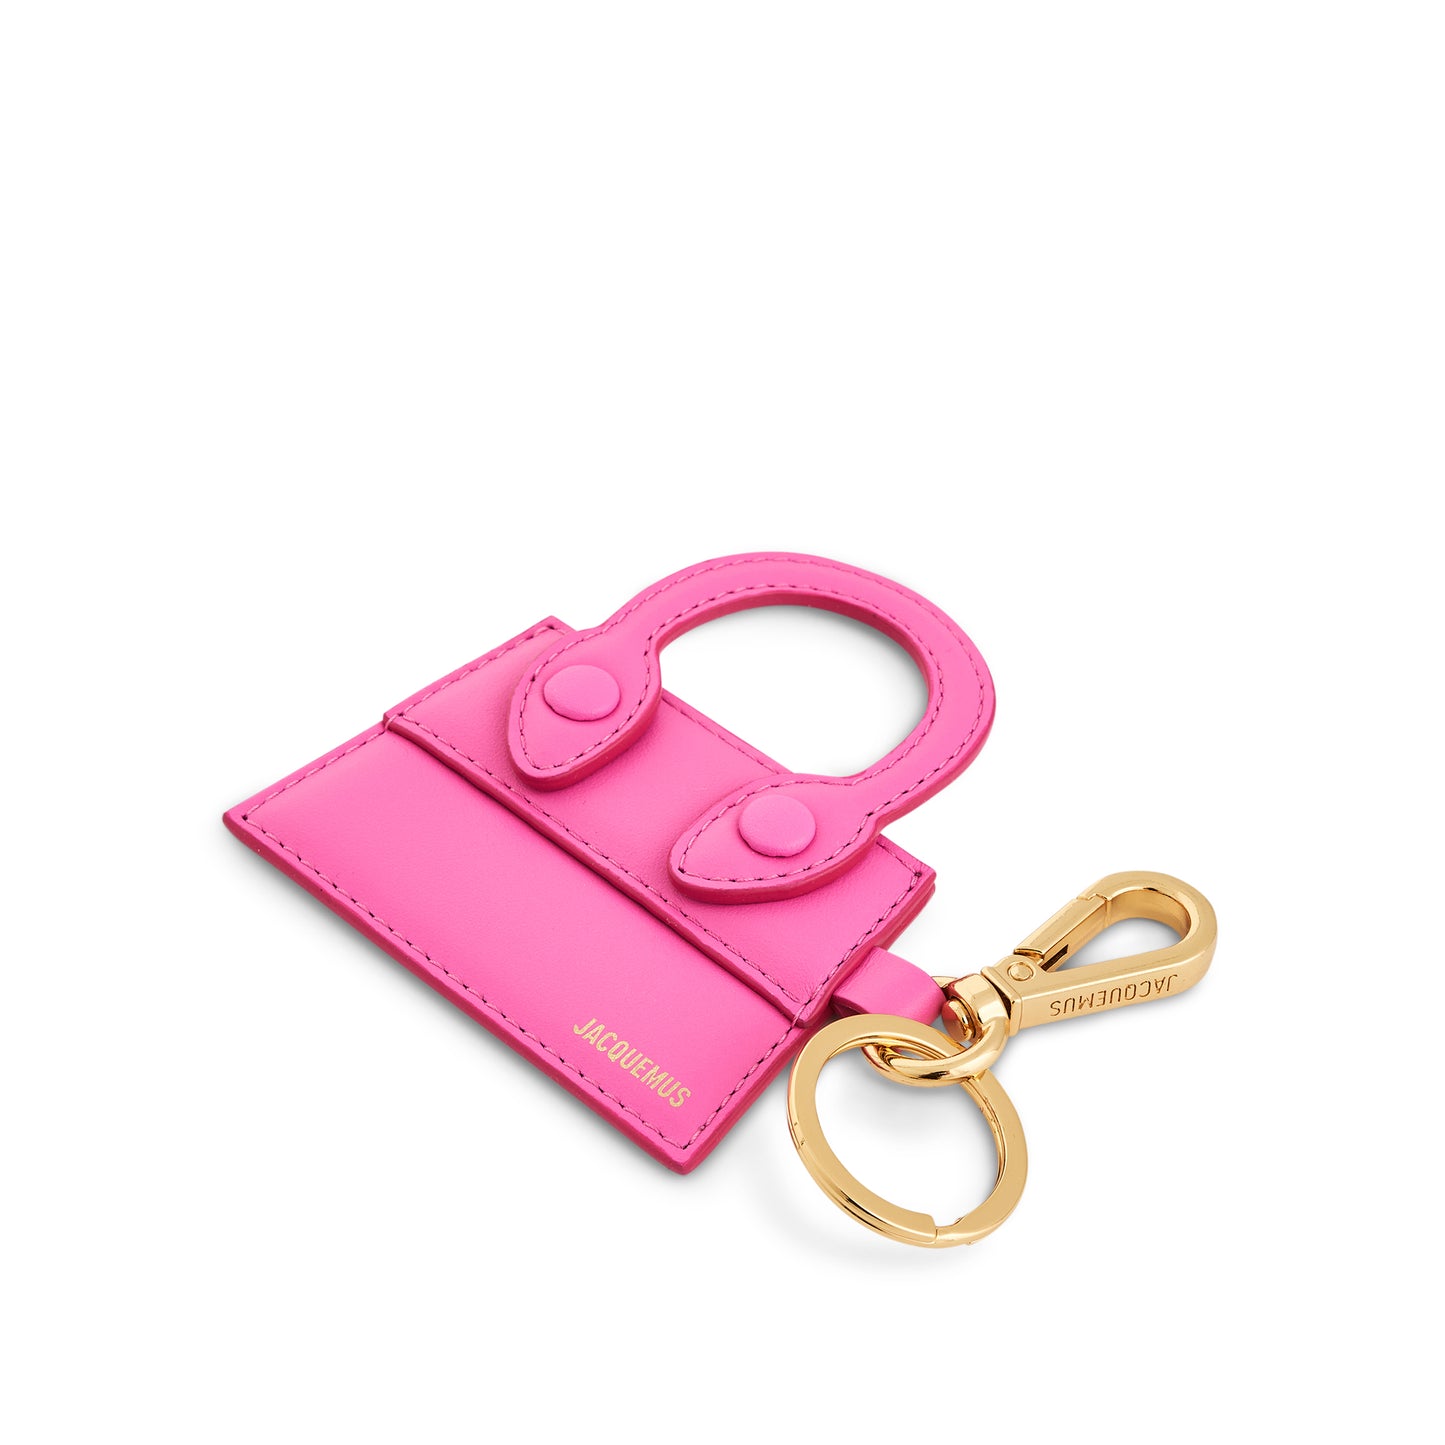 Le Porte-Cles Chiquito Keyring in Neon Pink